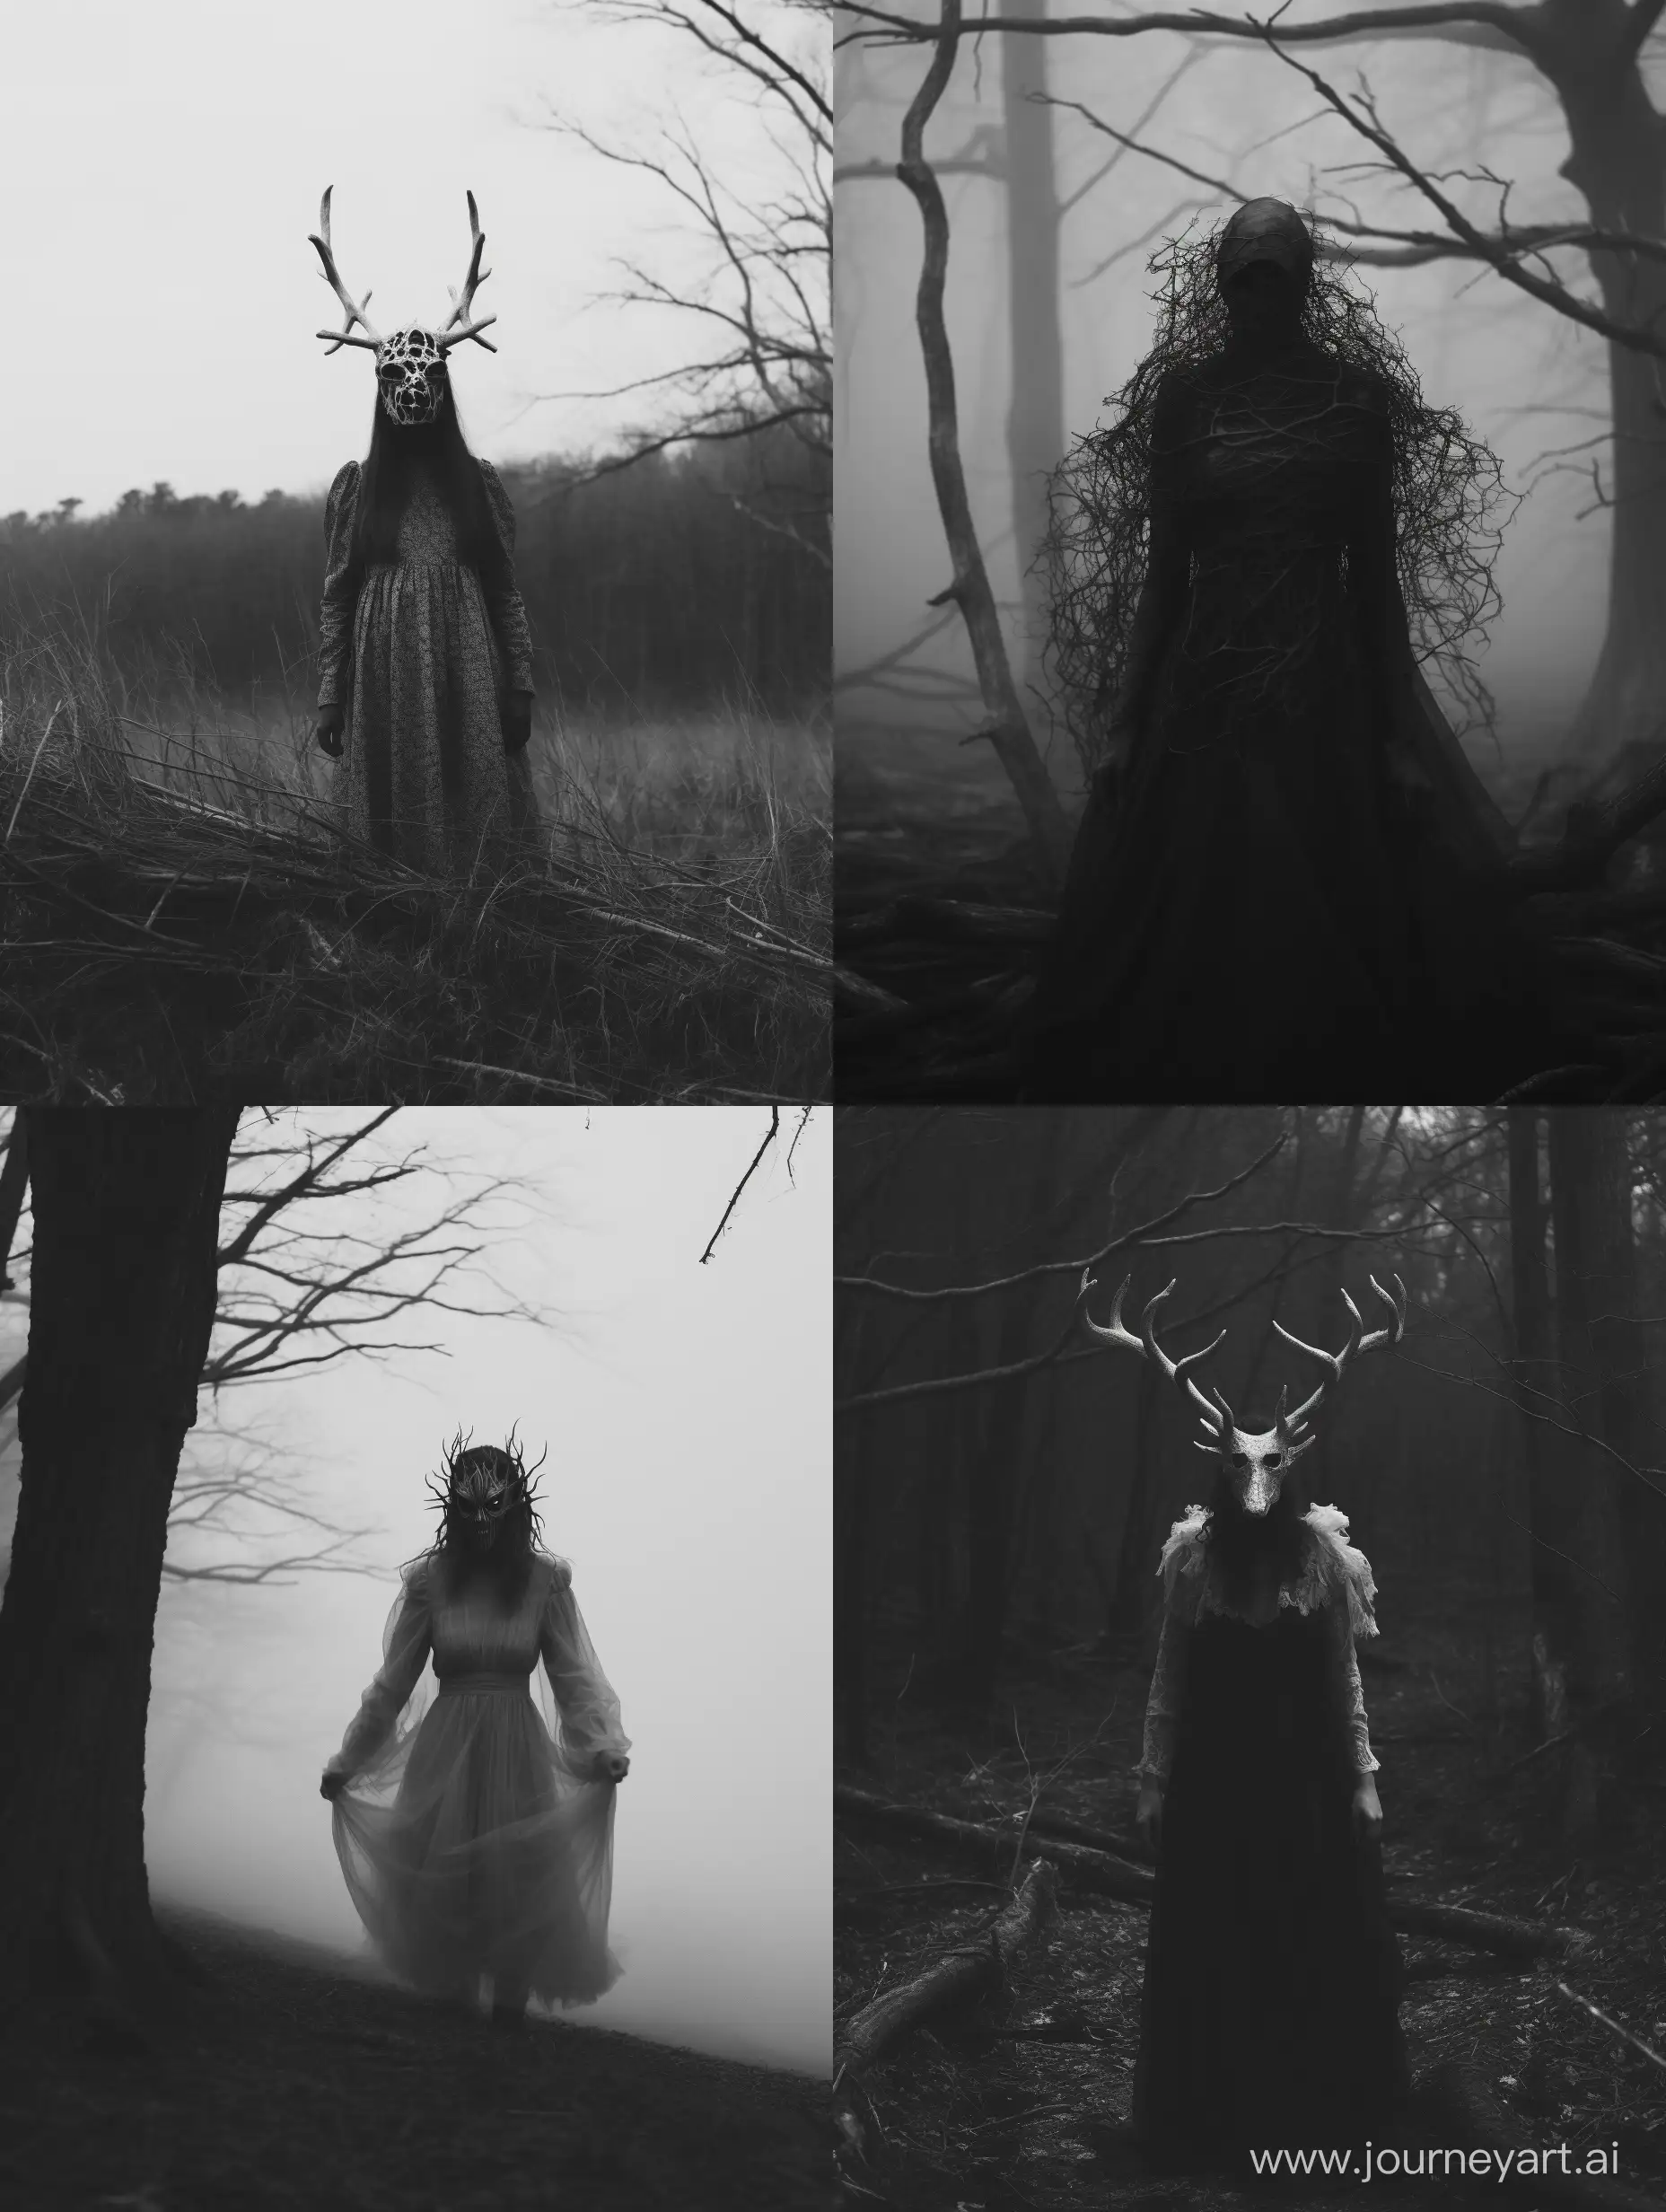 Eerie-Encounter-Vintage-Dress-and-Ghostly-Mythical-Creature-in-Folk-Horror-Scene